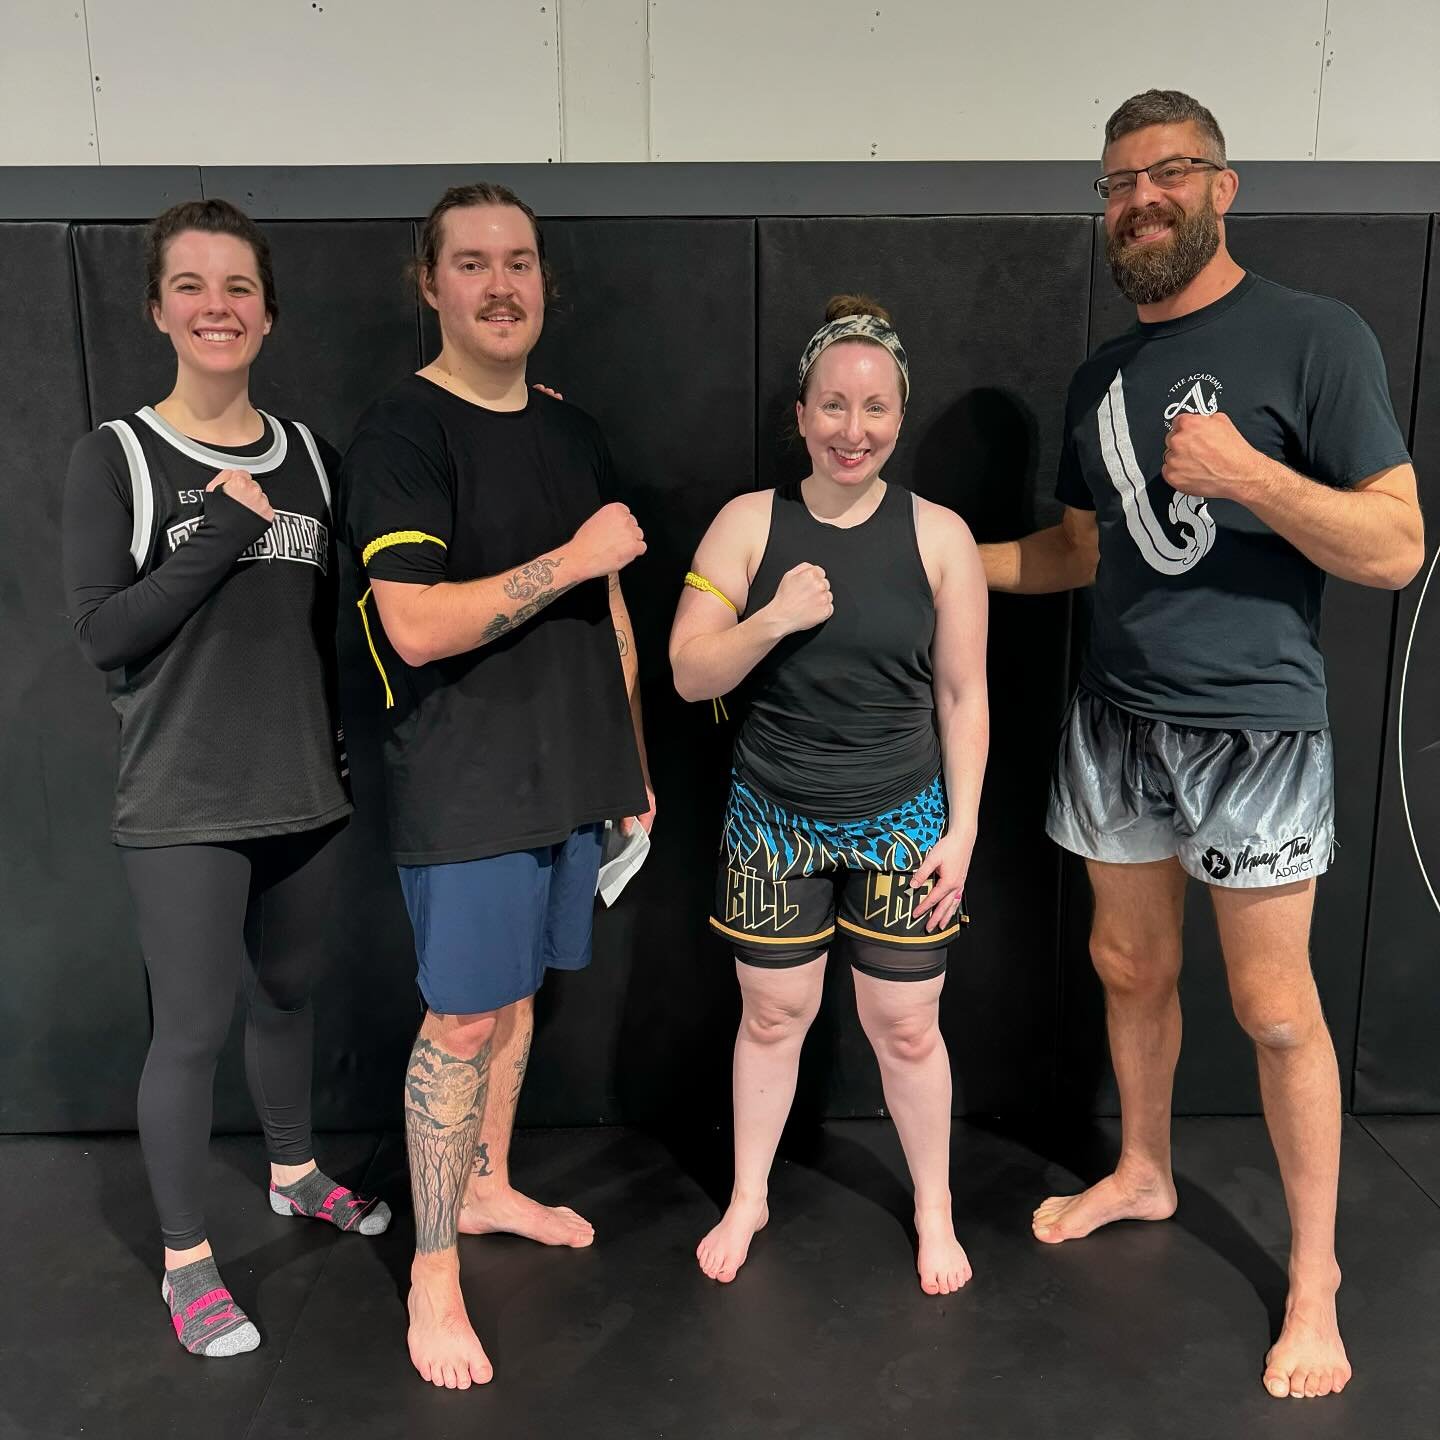 Congratulations to all of our Students who achieved their next rank in Muay Thai! Keep up the great work!

#muaythai #muaythailife #muaythaitraining #muaythaifighter #training #workhard #playhard #dedication #motivation #determination #passion #theac